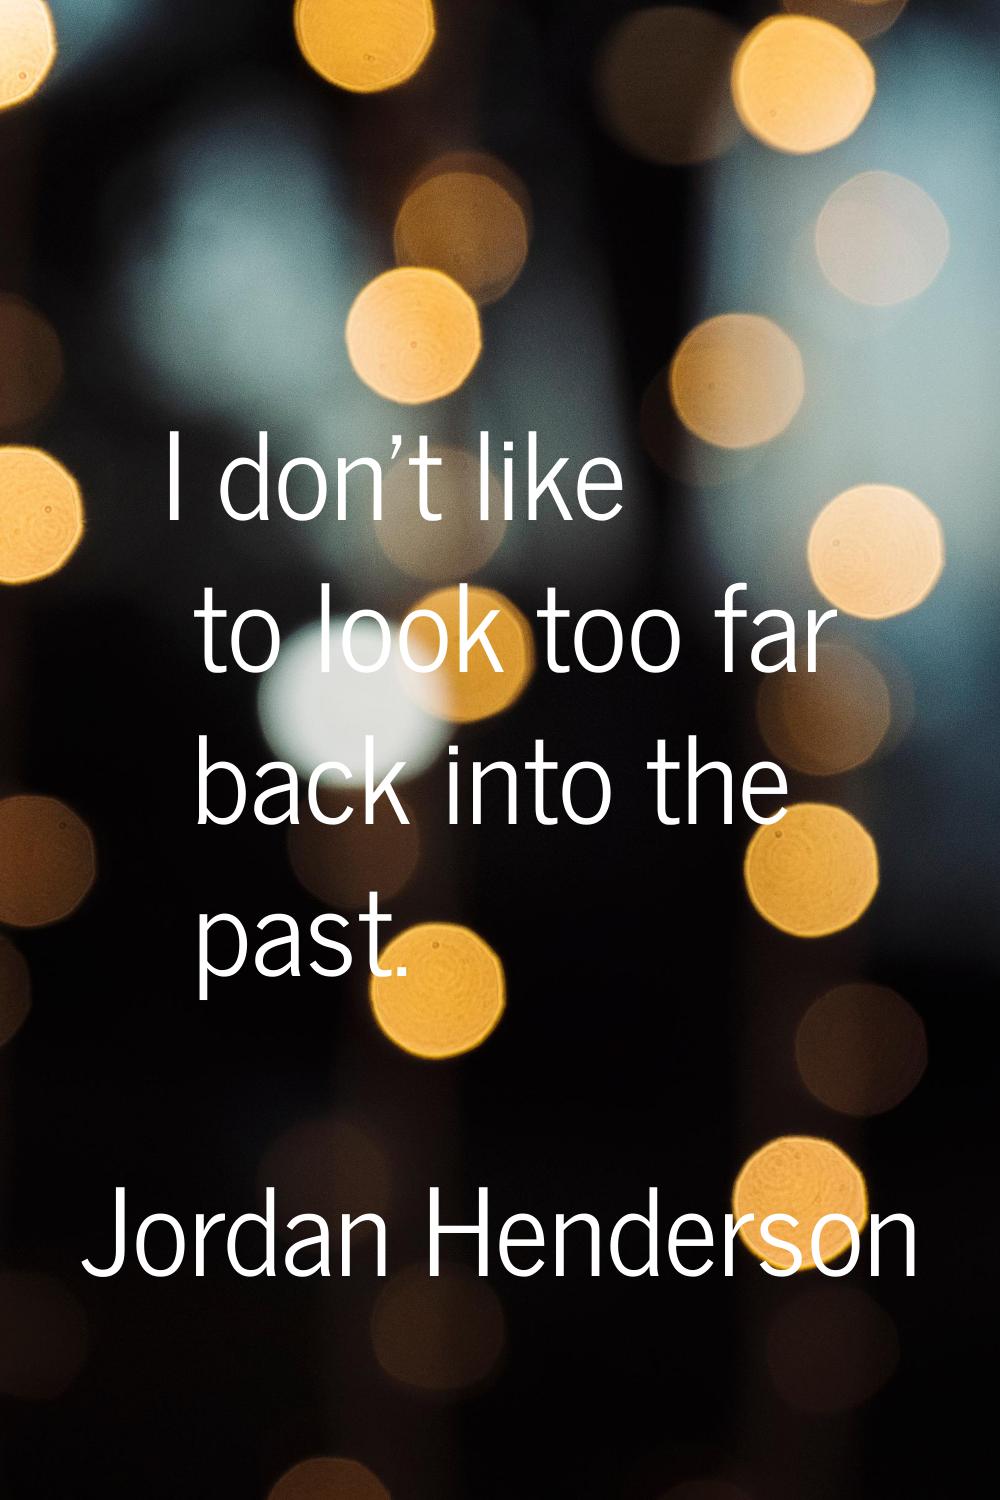 I don't like to look too far back into the past.